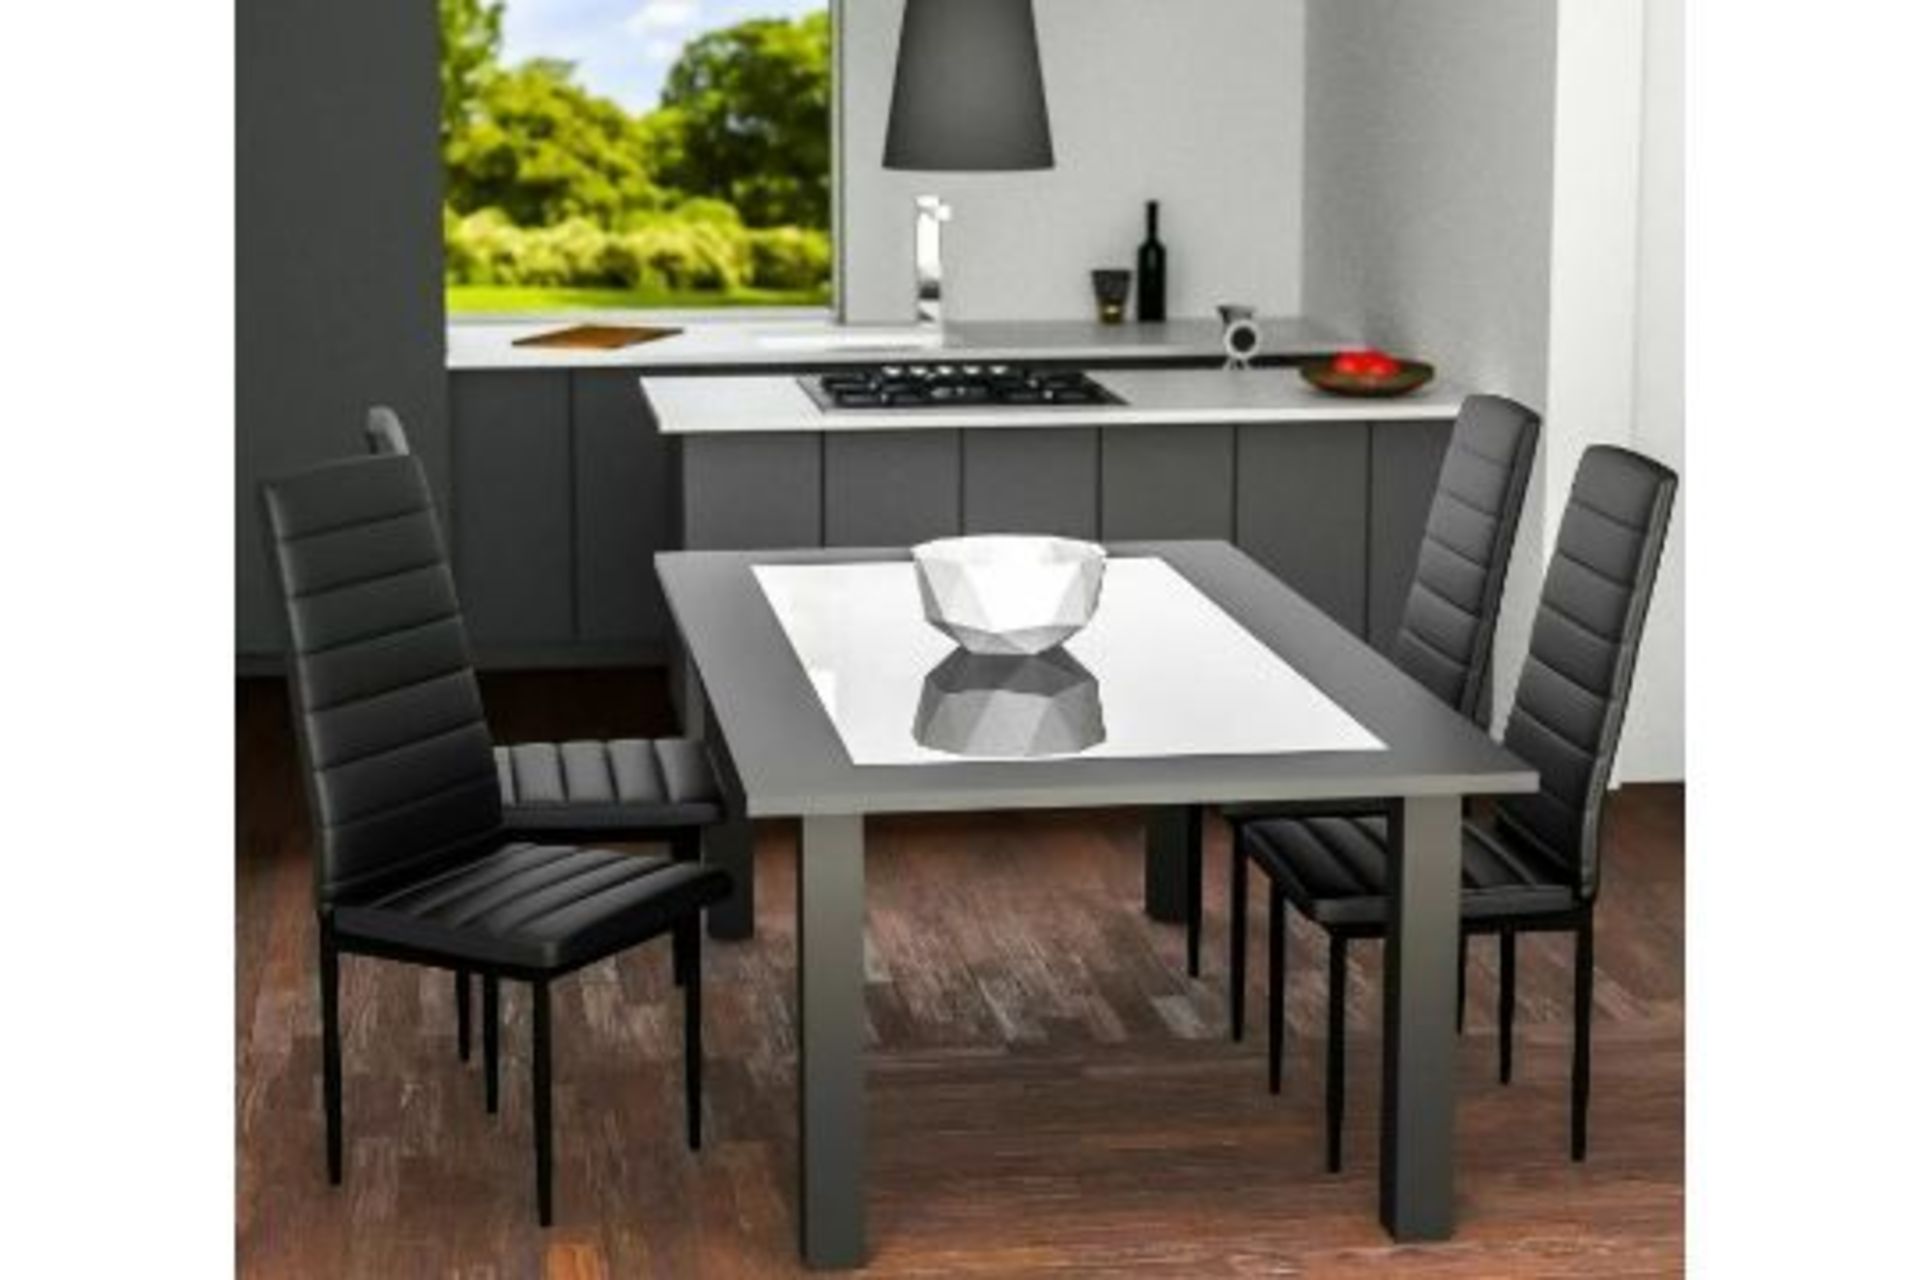 4 X NEW BOXED Modern Synthetic Leather Dining Chairs In Black. RRP £99.99 each, giving this lot a - Image 5 of 6